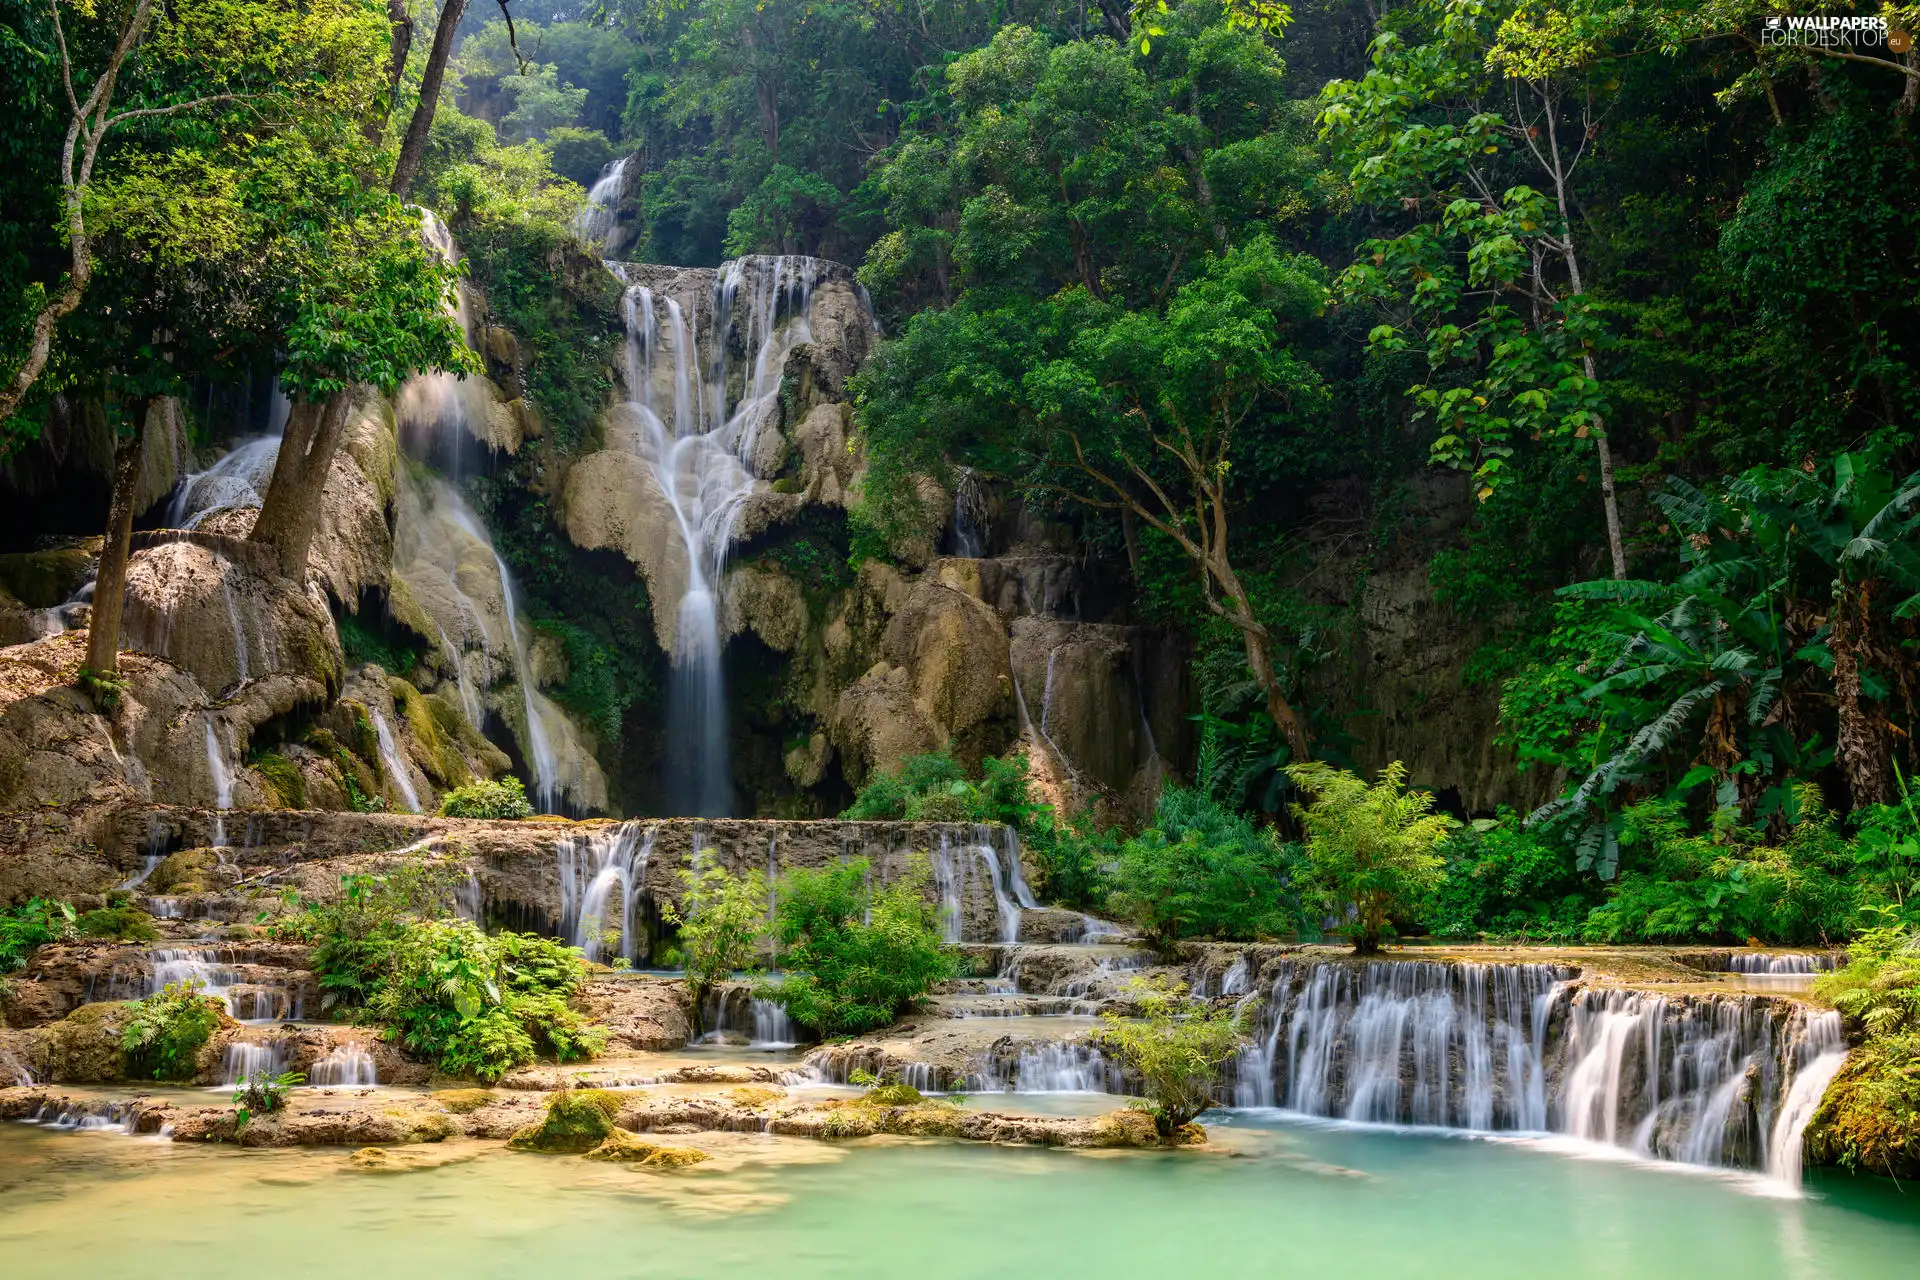 trees, viewes, Laos, rocks, Province of Louangphrabang, forest, Kuang Si Waterfall, cascade